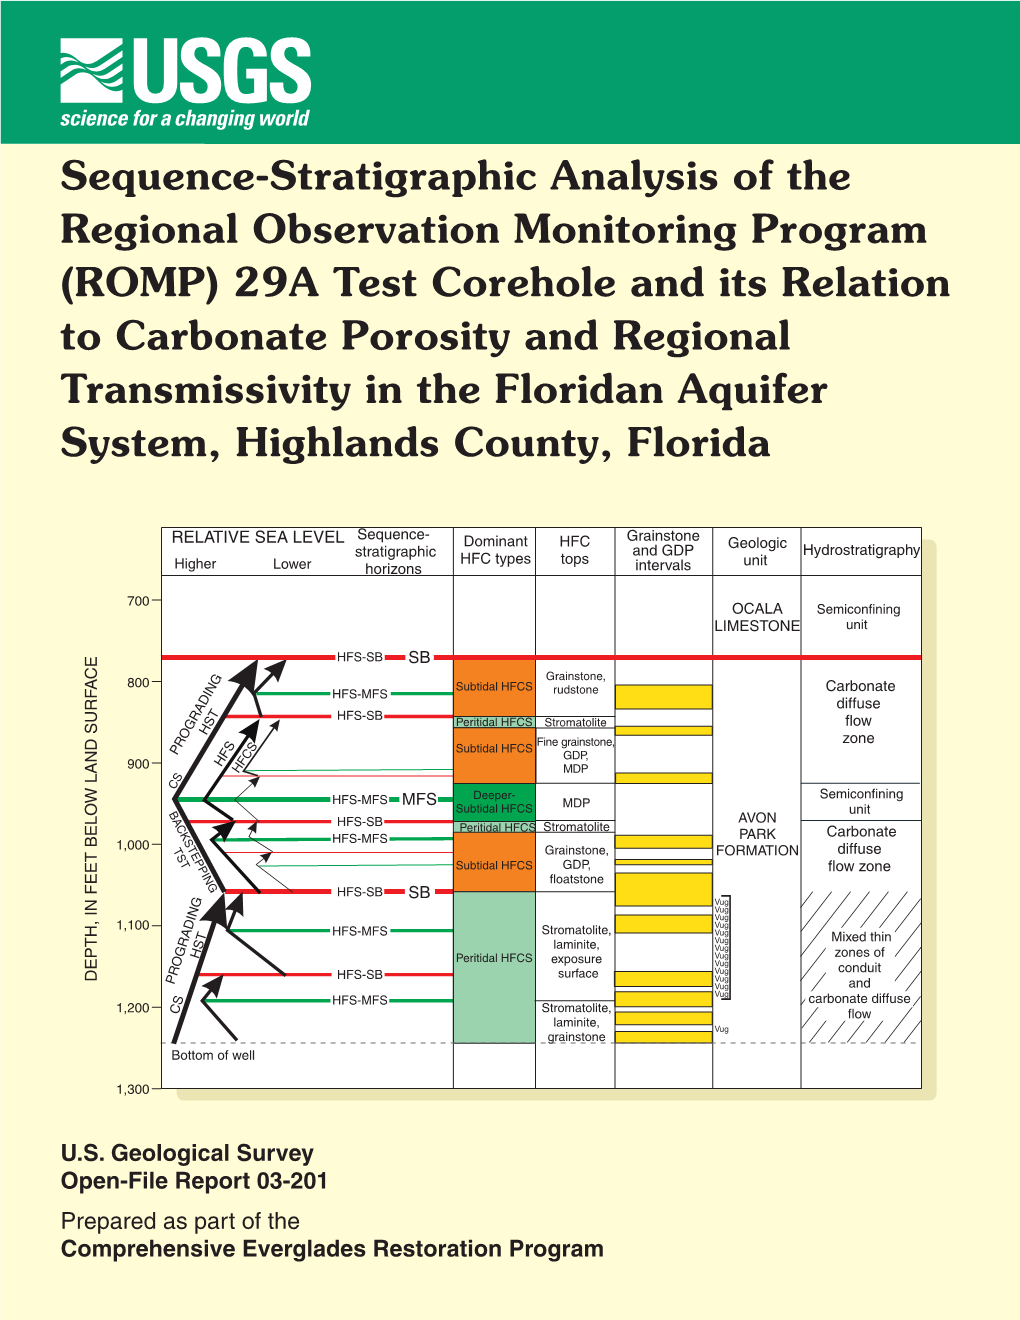 (ROMP) 29A Test Corehole and Its Relation to Carbonate Porosity and Regional Transmissivity in the Floridan Aquifer System, Highlands County, Florida